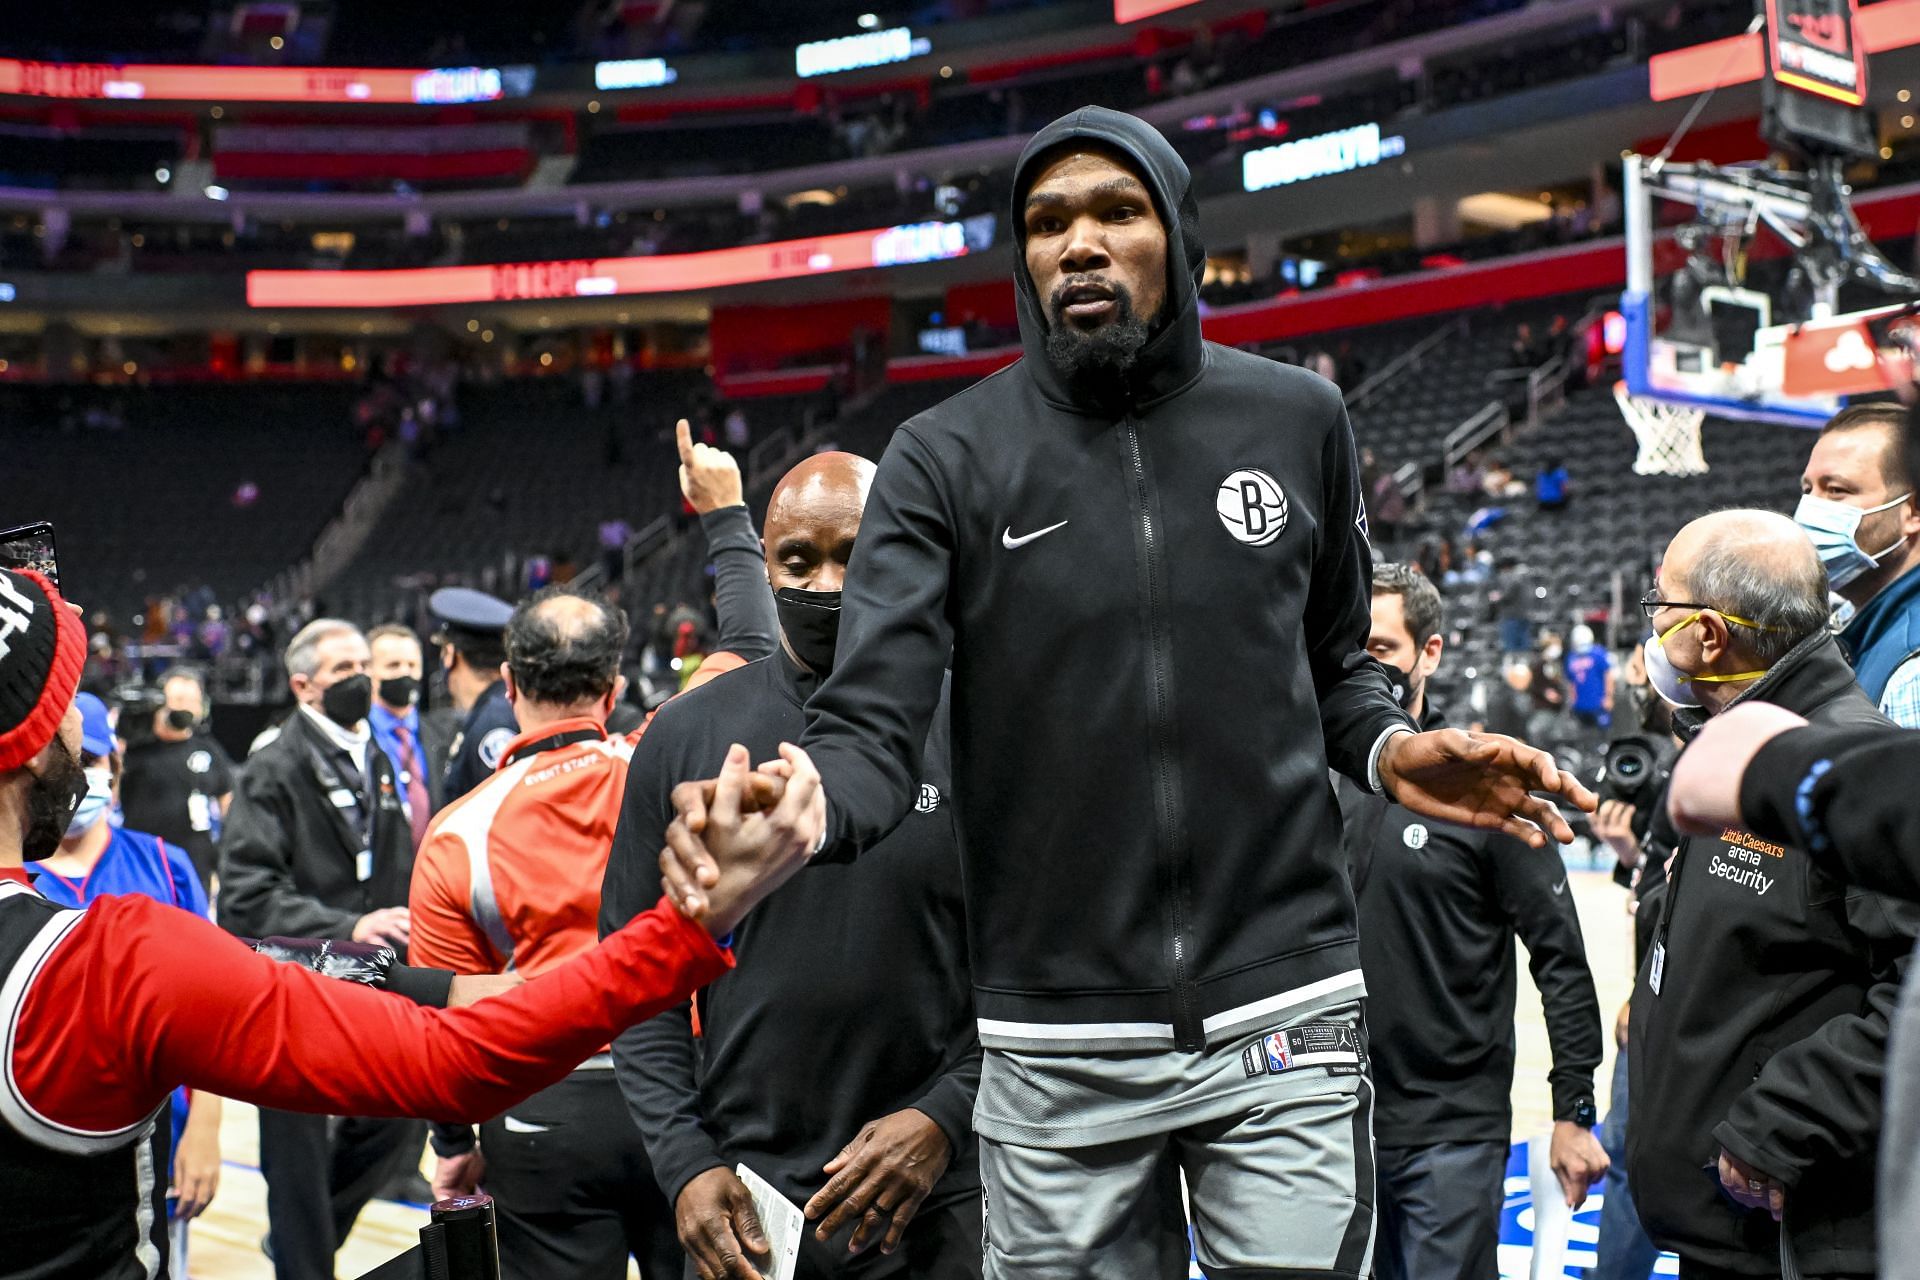 Brooklyn Nets star Kevin Durant leaving the court after dropping 51 on the Detroit Pistons